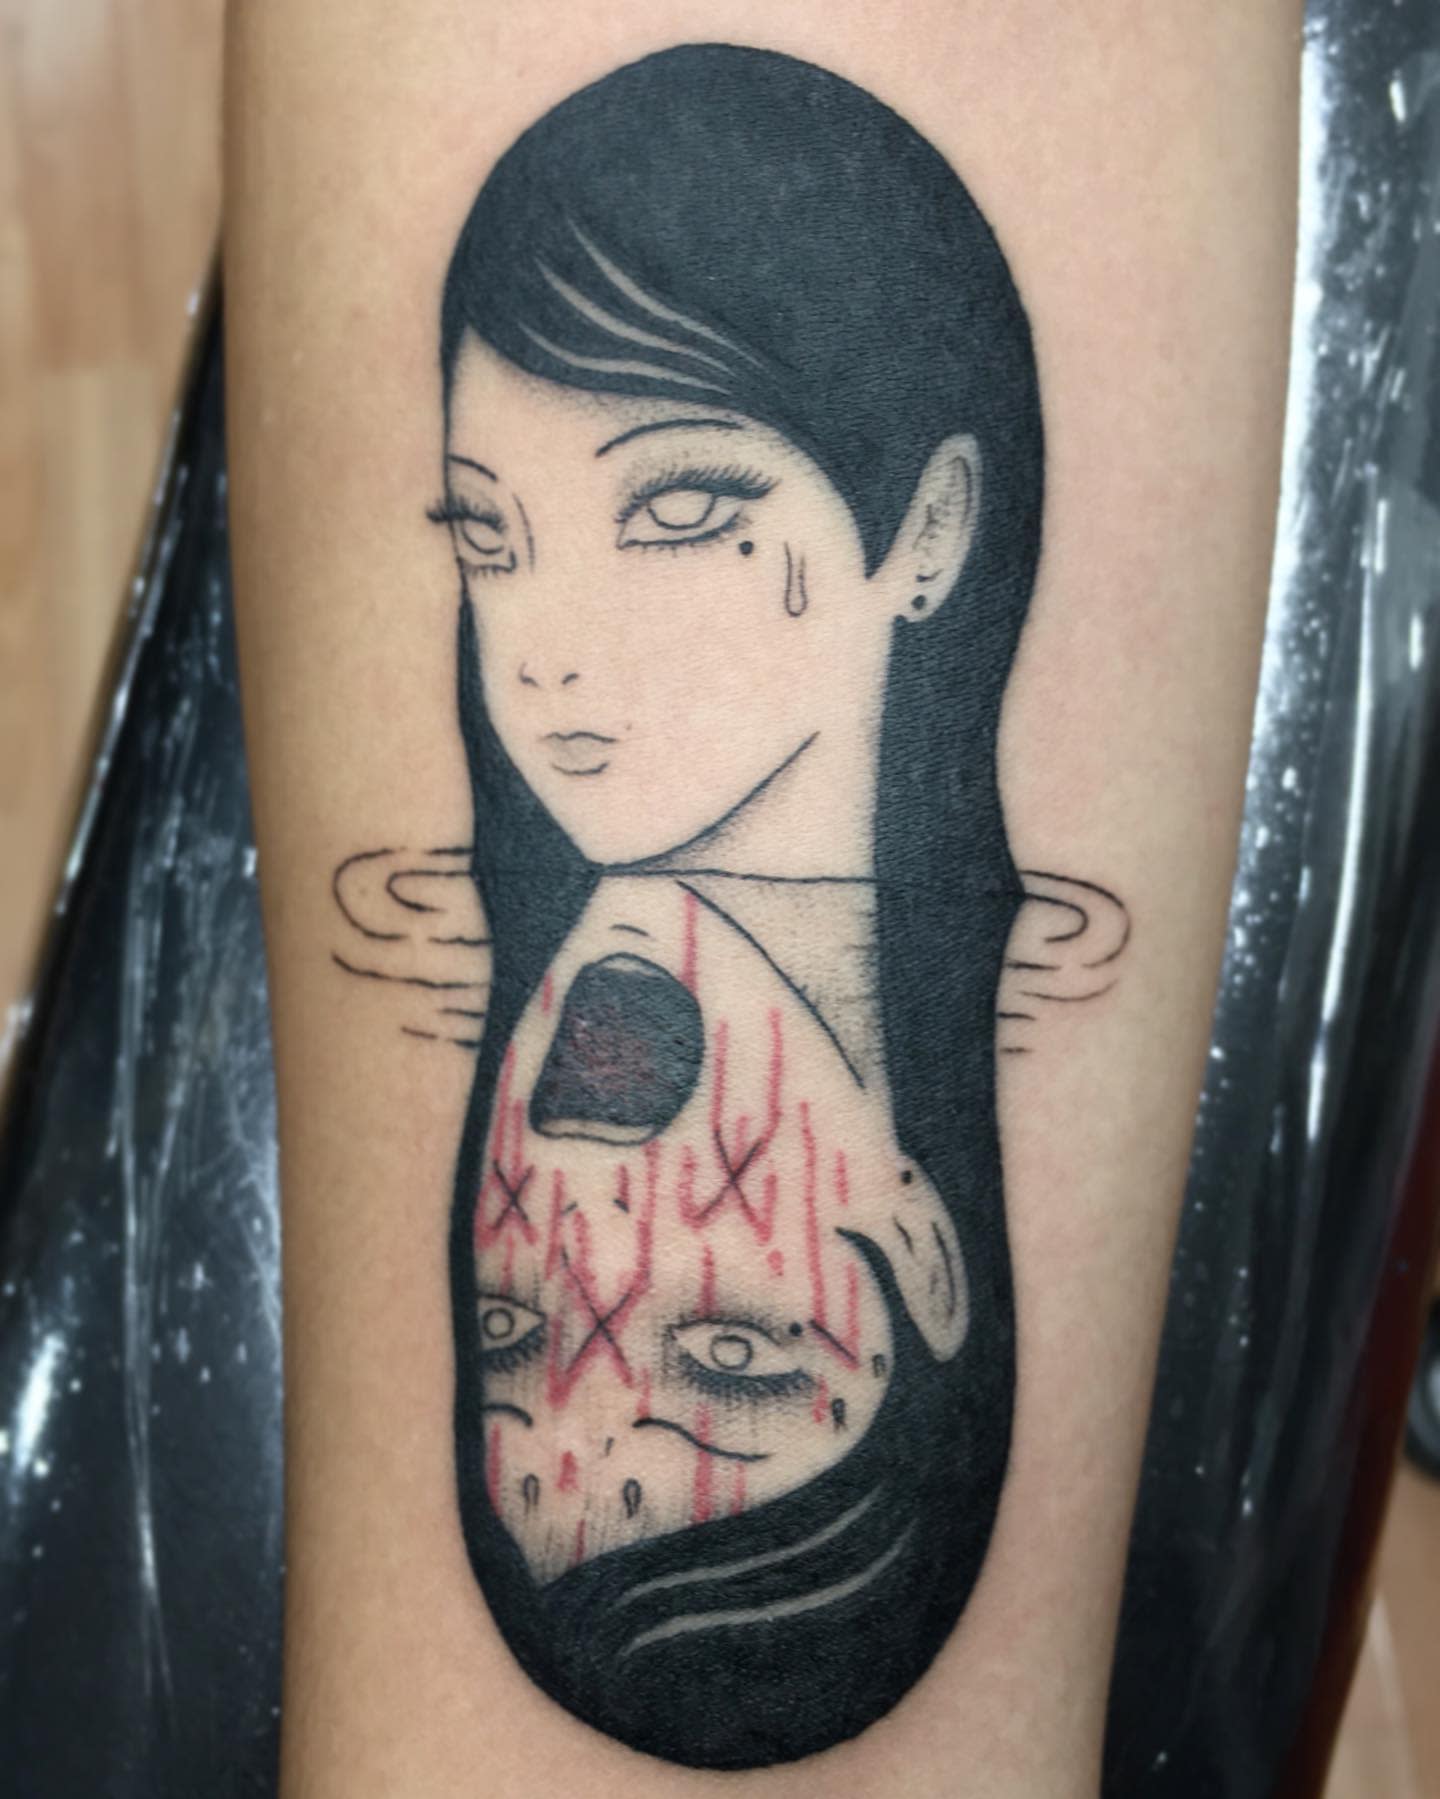 iron blood tattoos I banged out this piece by your boi Junji Ito